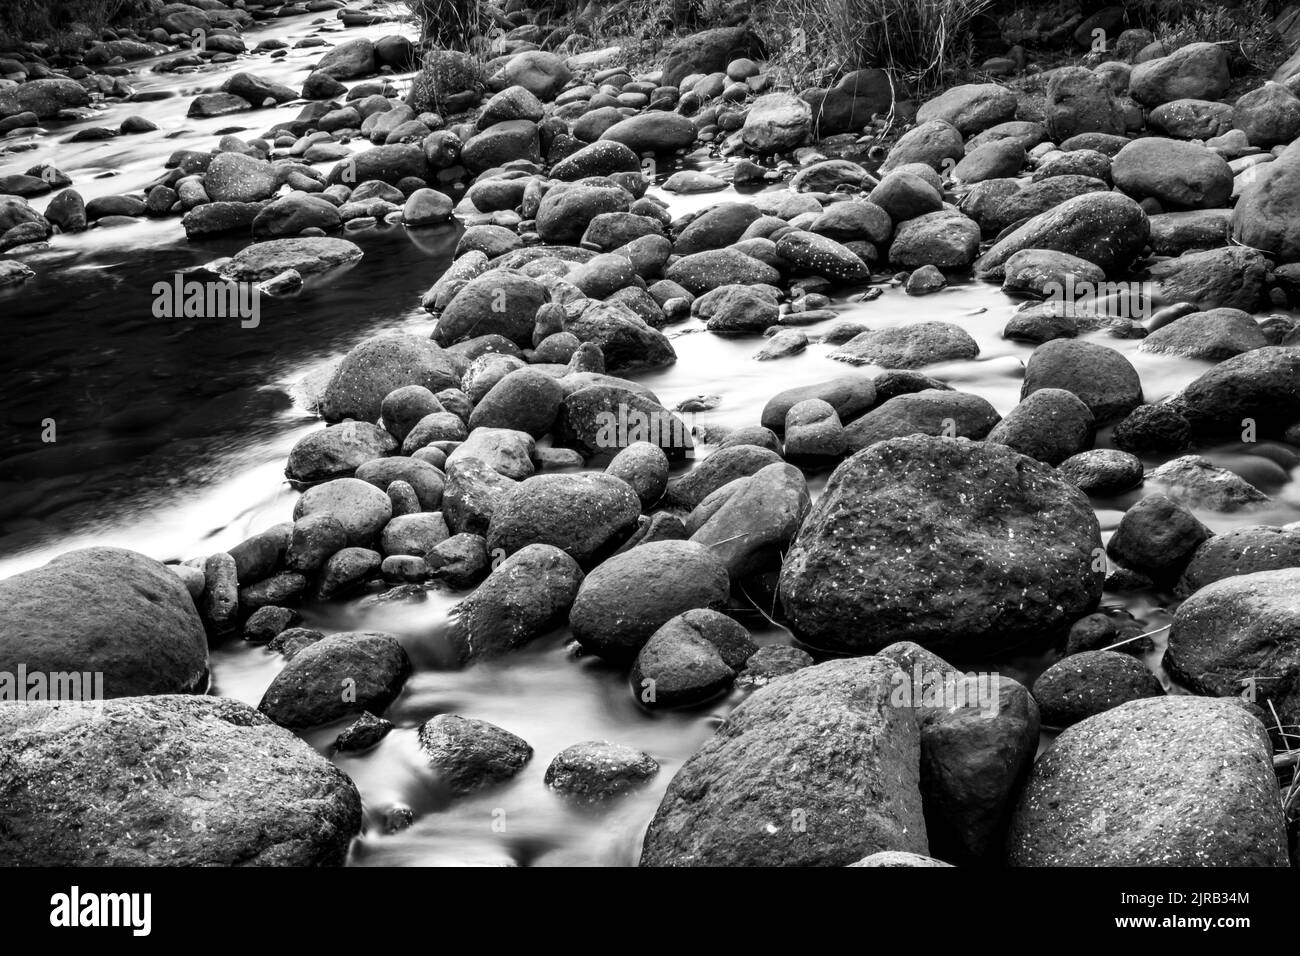 Long exposure of a fast flowing river between rounded basalt boulders in the Drakensberg Mountains of South Africa in black and white. Stock Photo